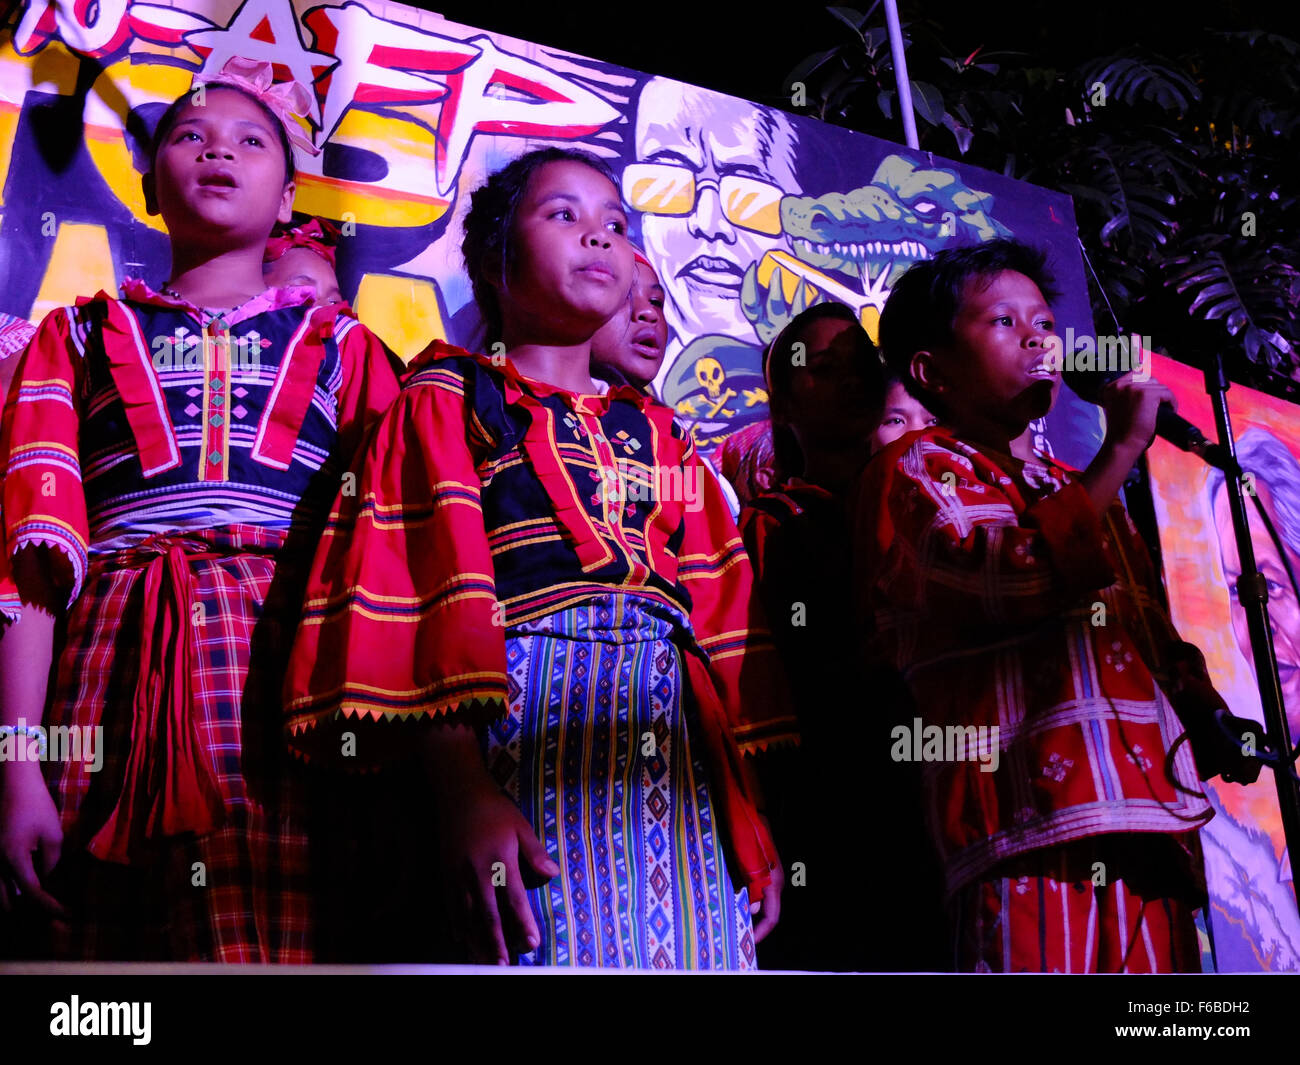 The Lumad children sings a very meaningful message. The Lumad peoples are a group of indigenous people of the southern Philippines. It is a Cebuano term meaning 'native' or 'indigenous'. The term is short for Katawhang Lumad (literally 'indigenous peoples'), the autonym officially adopted by the delegates of the Lumad Mindanao Peoples Federation (LMPF) founding assembly on 26 June 1986 at the Guadalupe Formation Center, Balindog, Kidapawan, Cotabato, Philippines. It is the self-ascription and collective identity of the indigenous peoples of Mindanao. (Photo by Josefiel Rivera/Pacific Press) Stock Photo